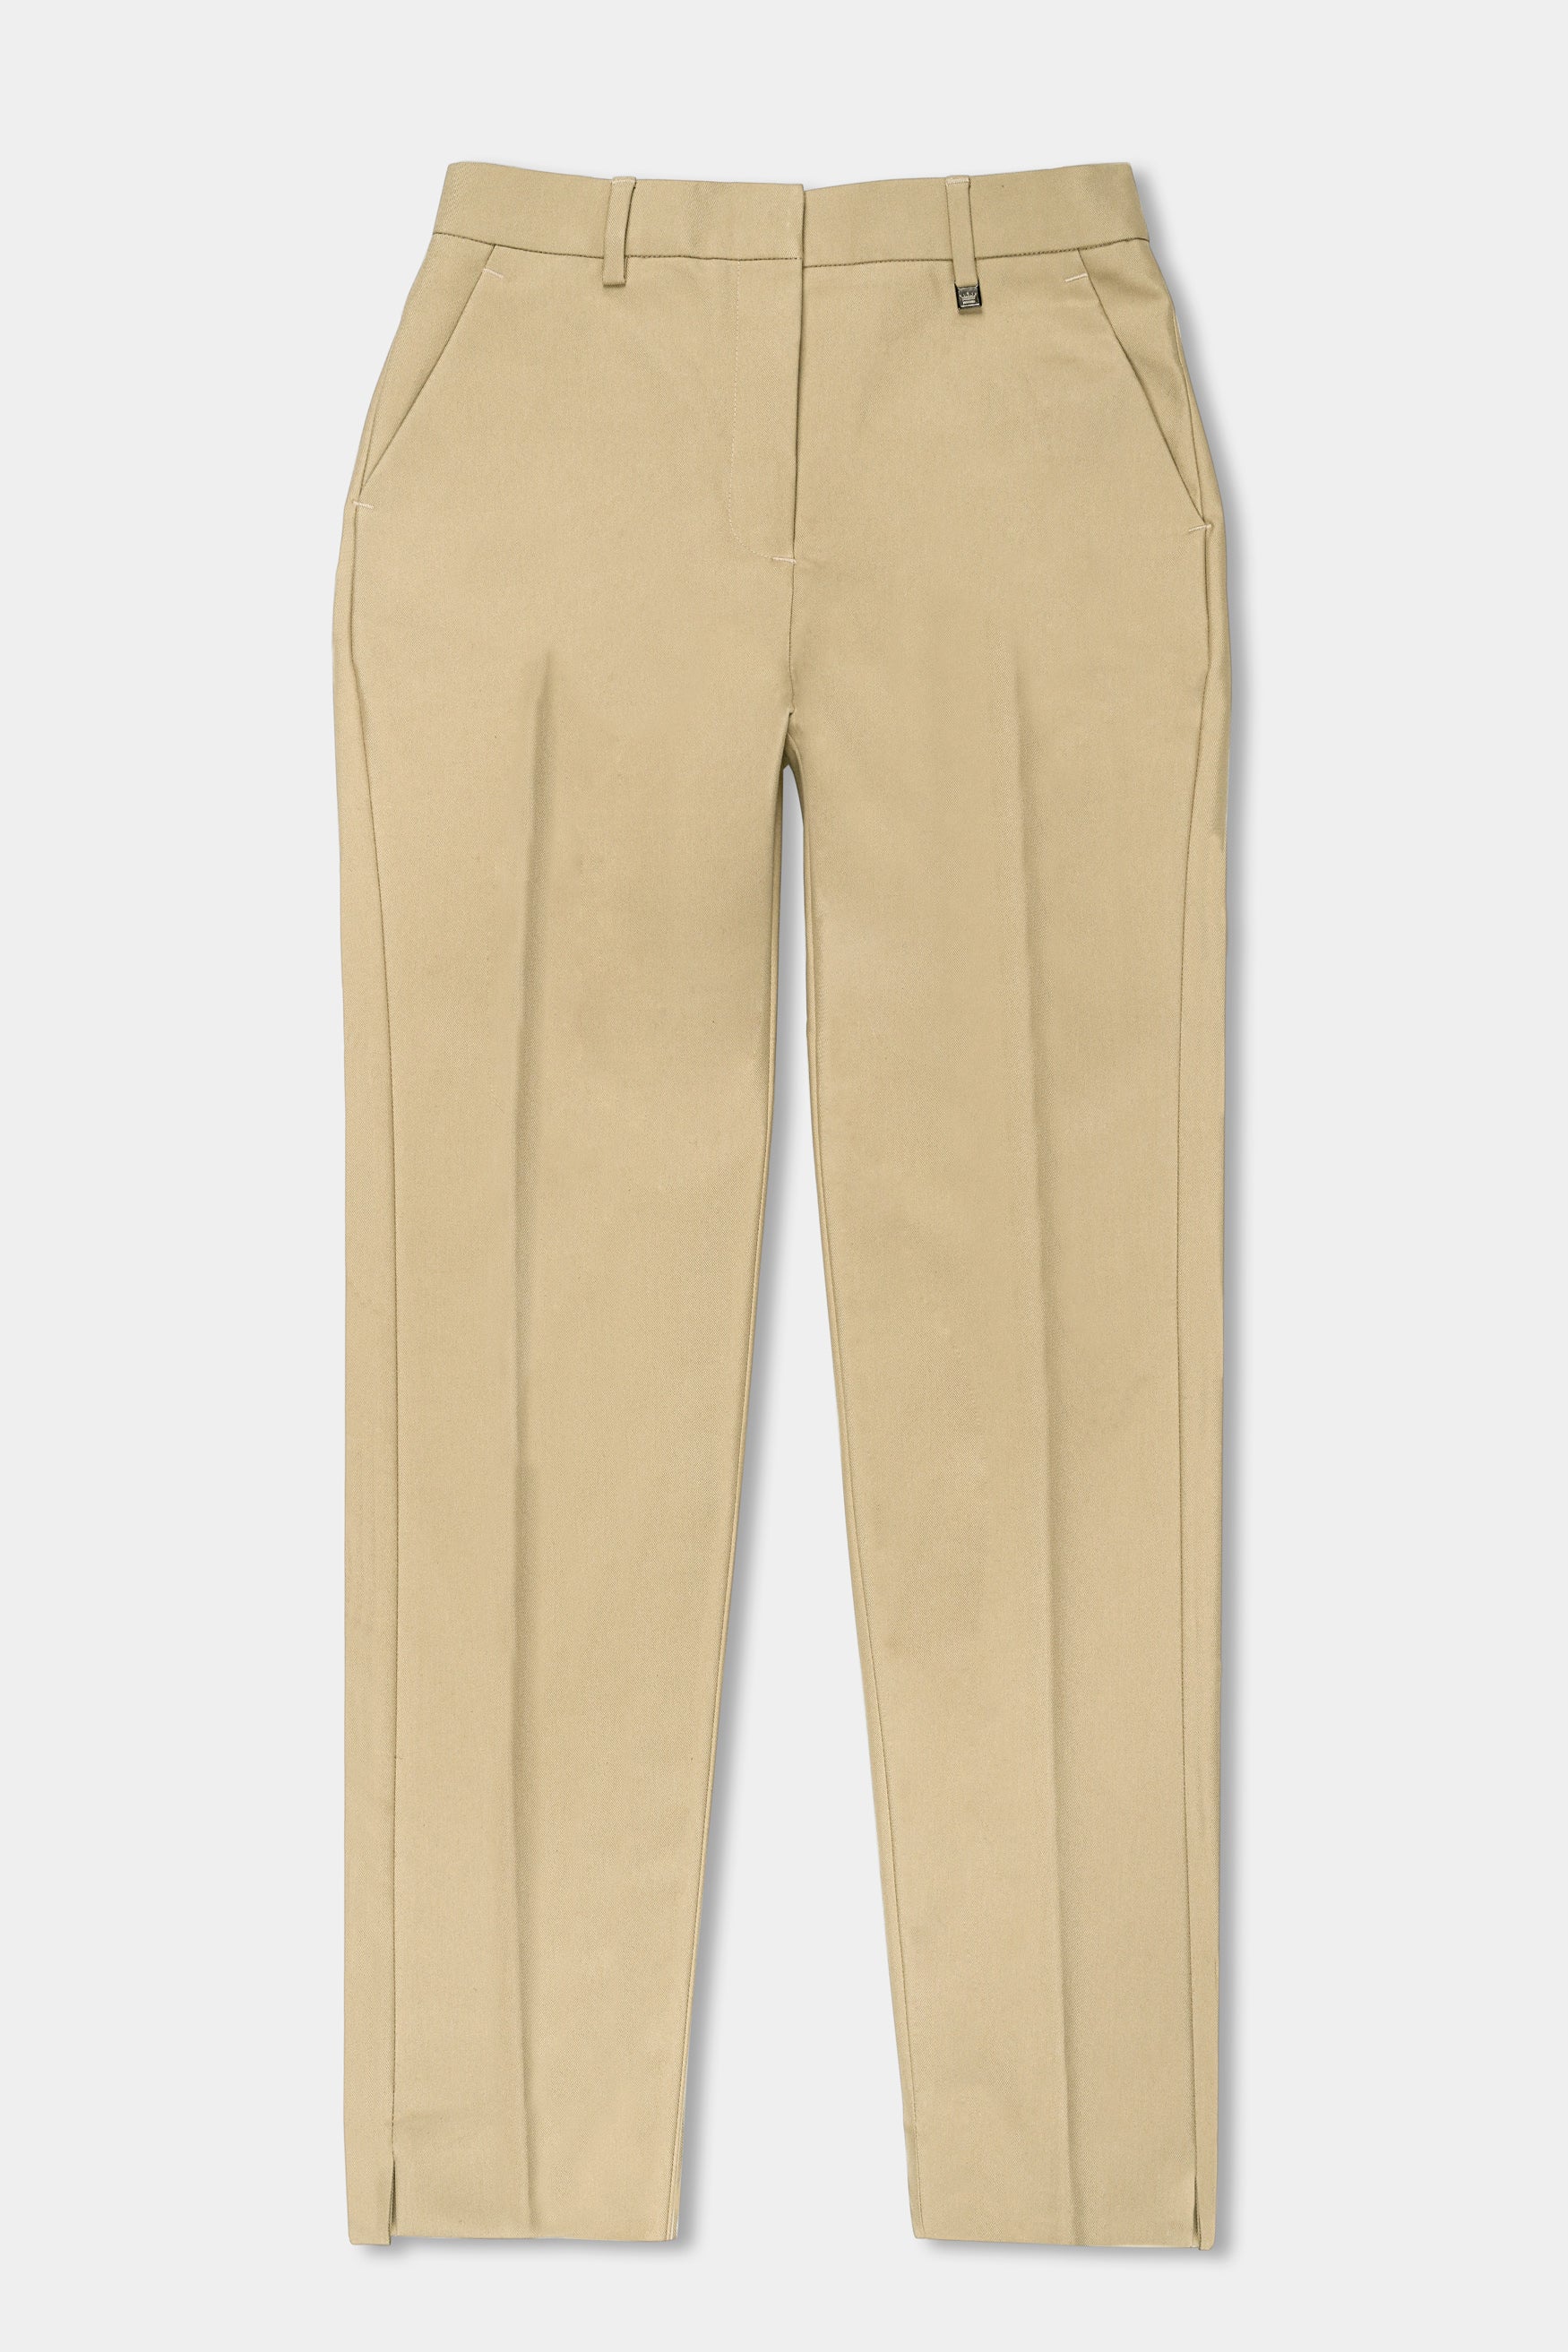 Cashmere Brown Wool Rich Women’s Pant